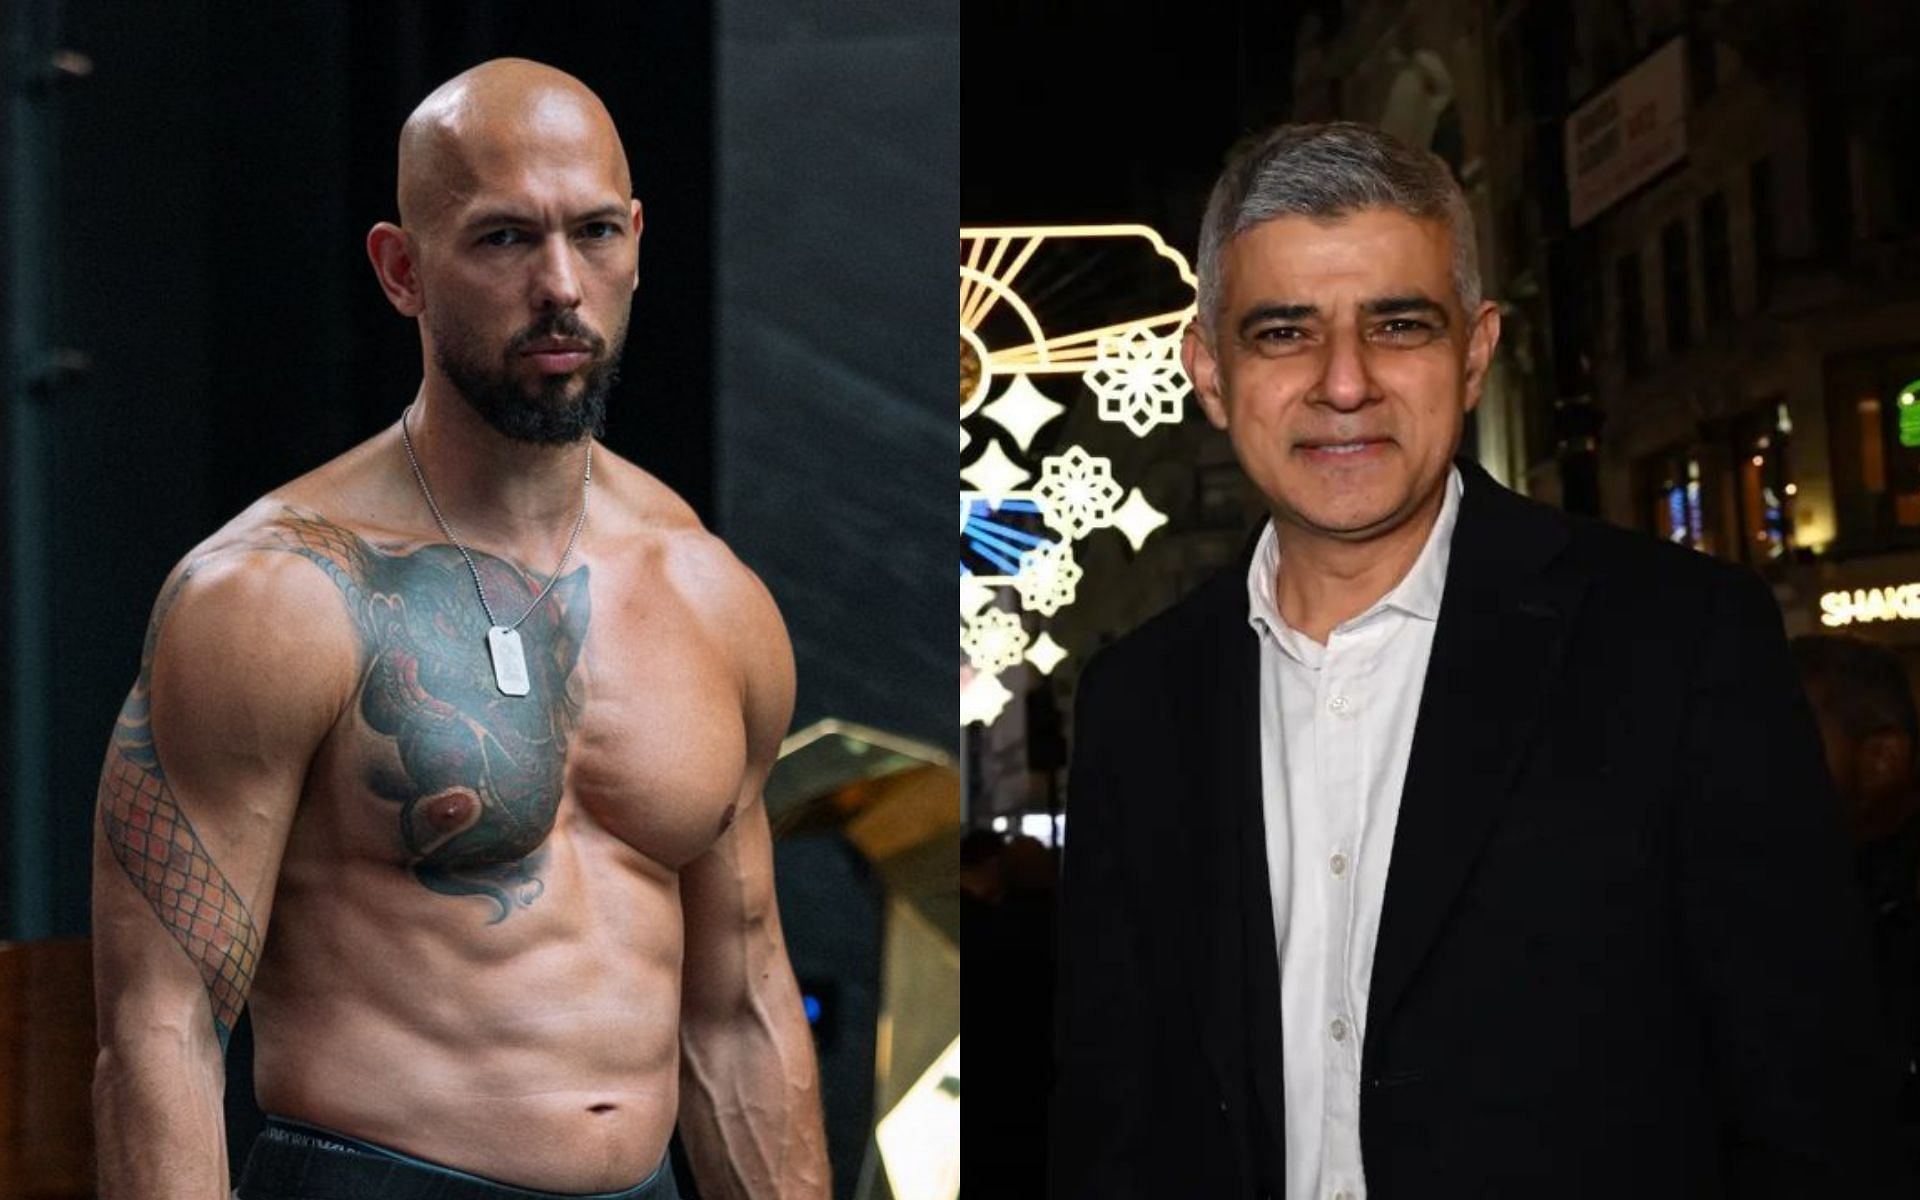 Andrew Tate unleashes conspiracy theory alleging Sadiq Khan rigged London mayoral election